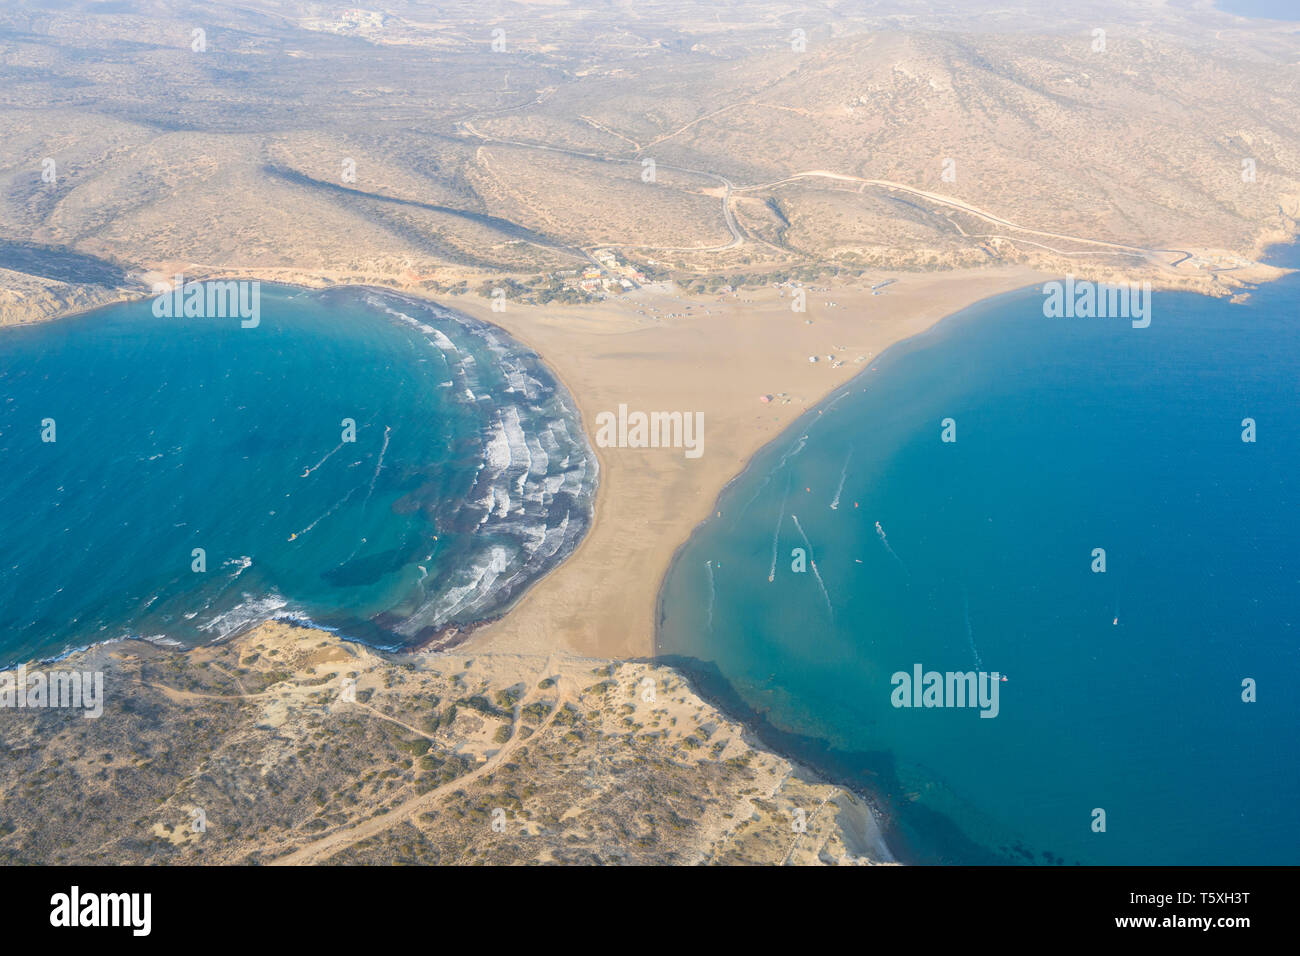 Greece, Rhodes, Prassonissi Pensinsula, a popular place for watersports to due to high wind currents Stock Photo